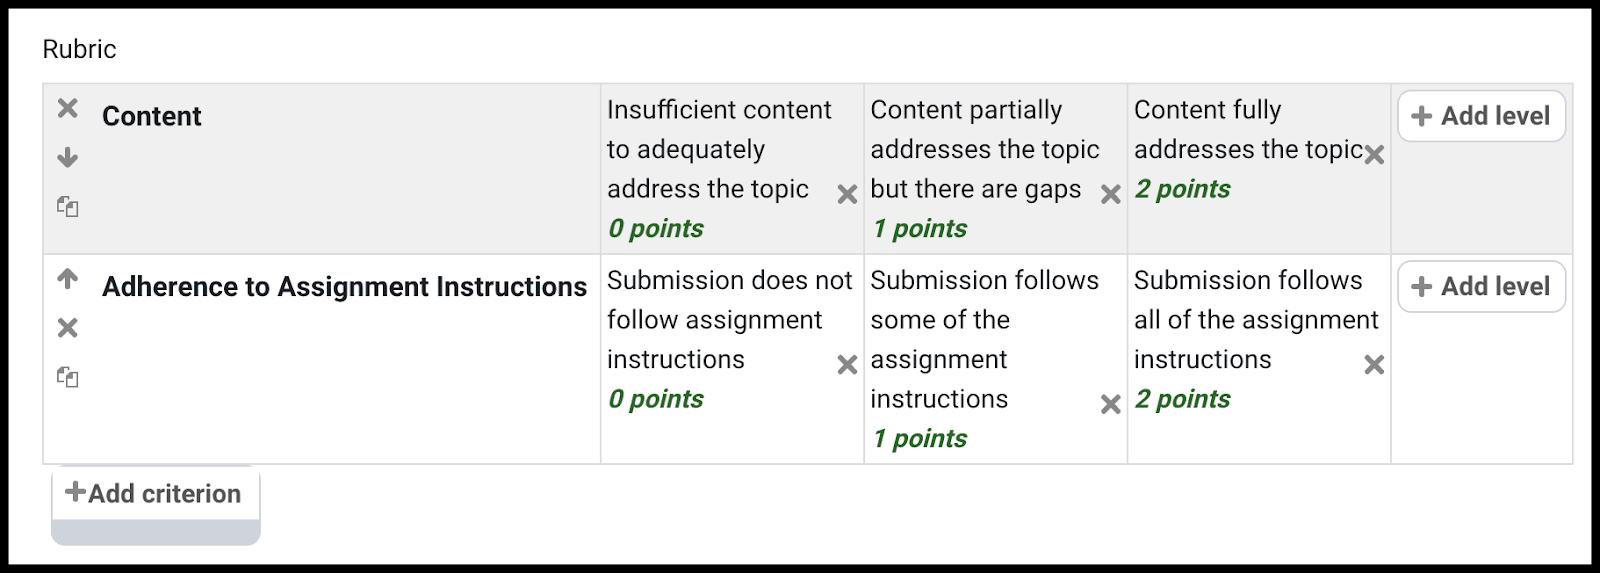 View of a Moodle rubric in the process of being created; Criteria and levels are shown in a table format, with point values at the bottom of each item; Add level option is on the top right and Add criterion option is at the bottom left